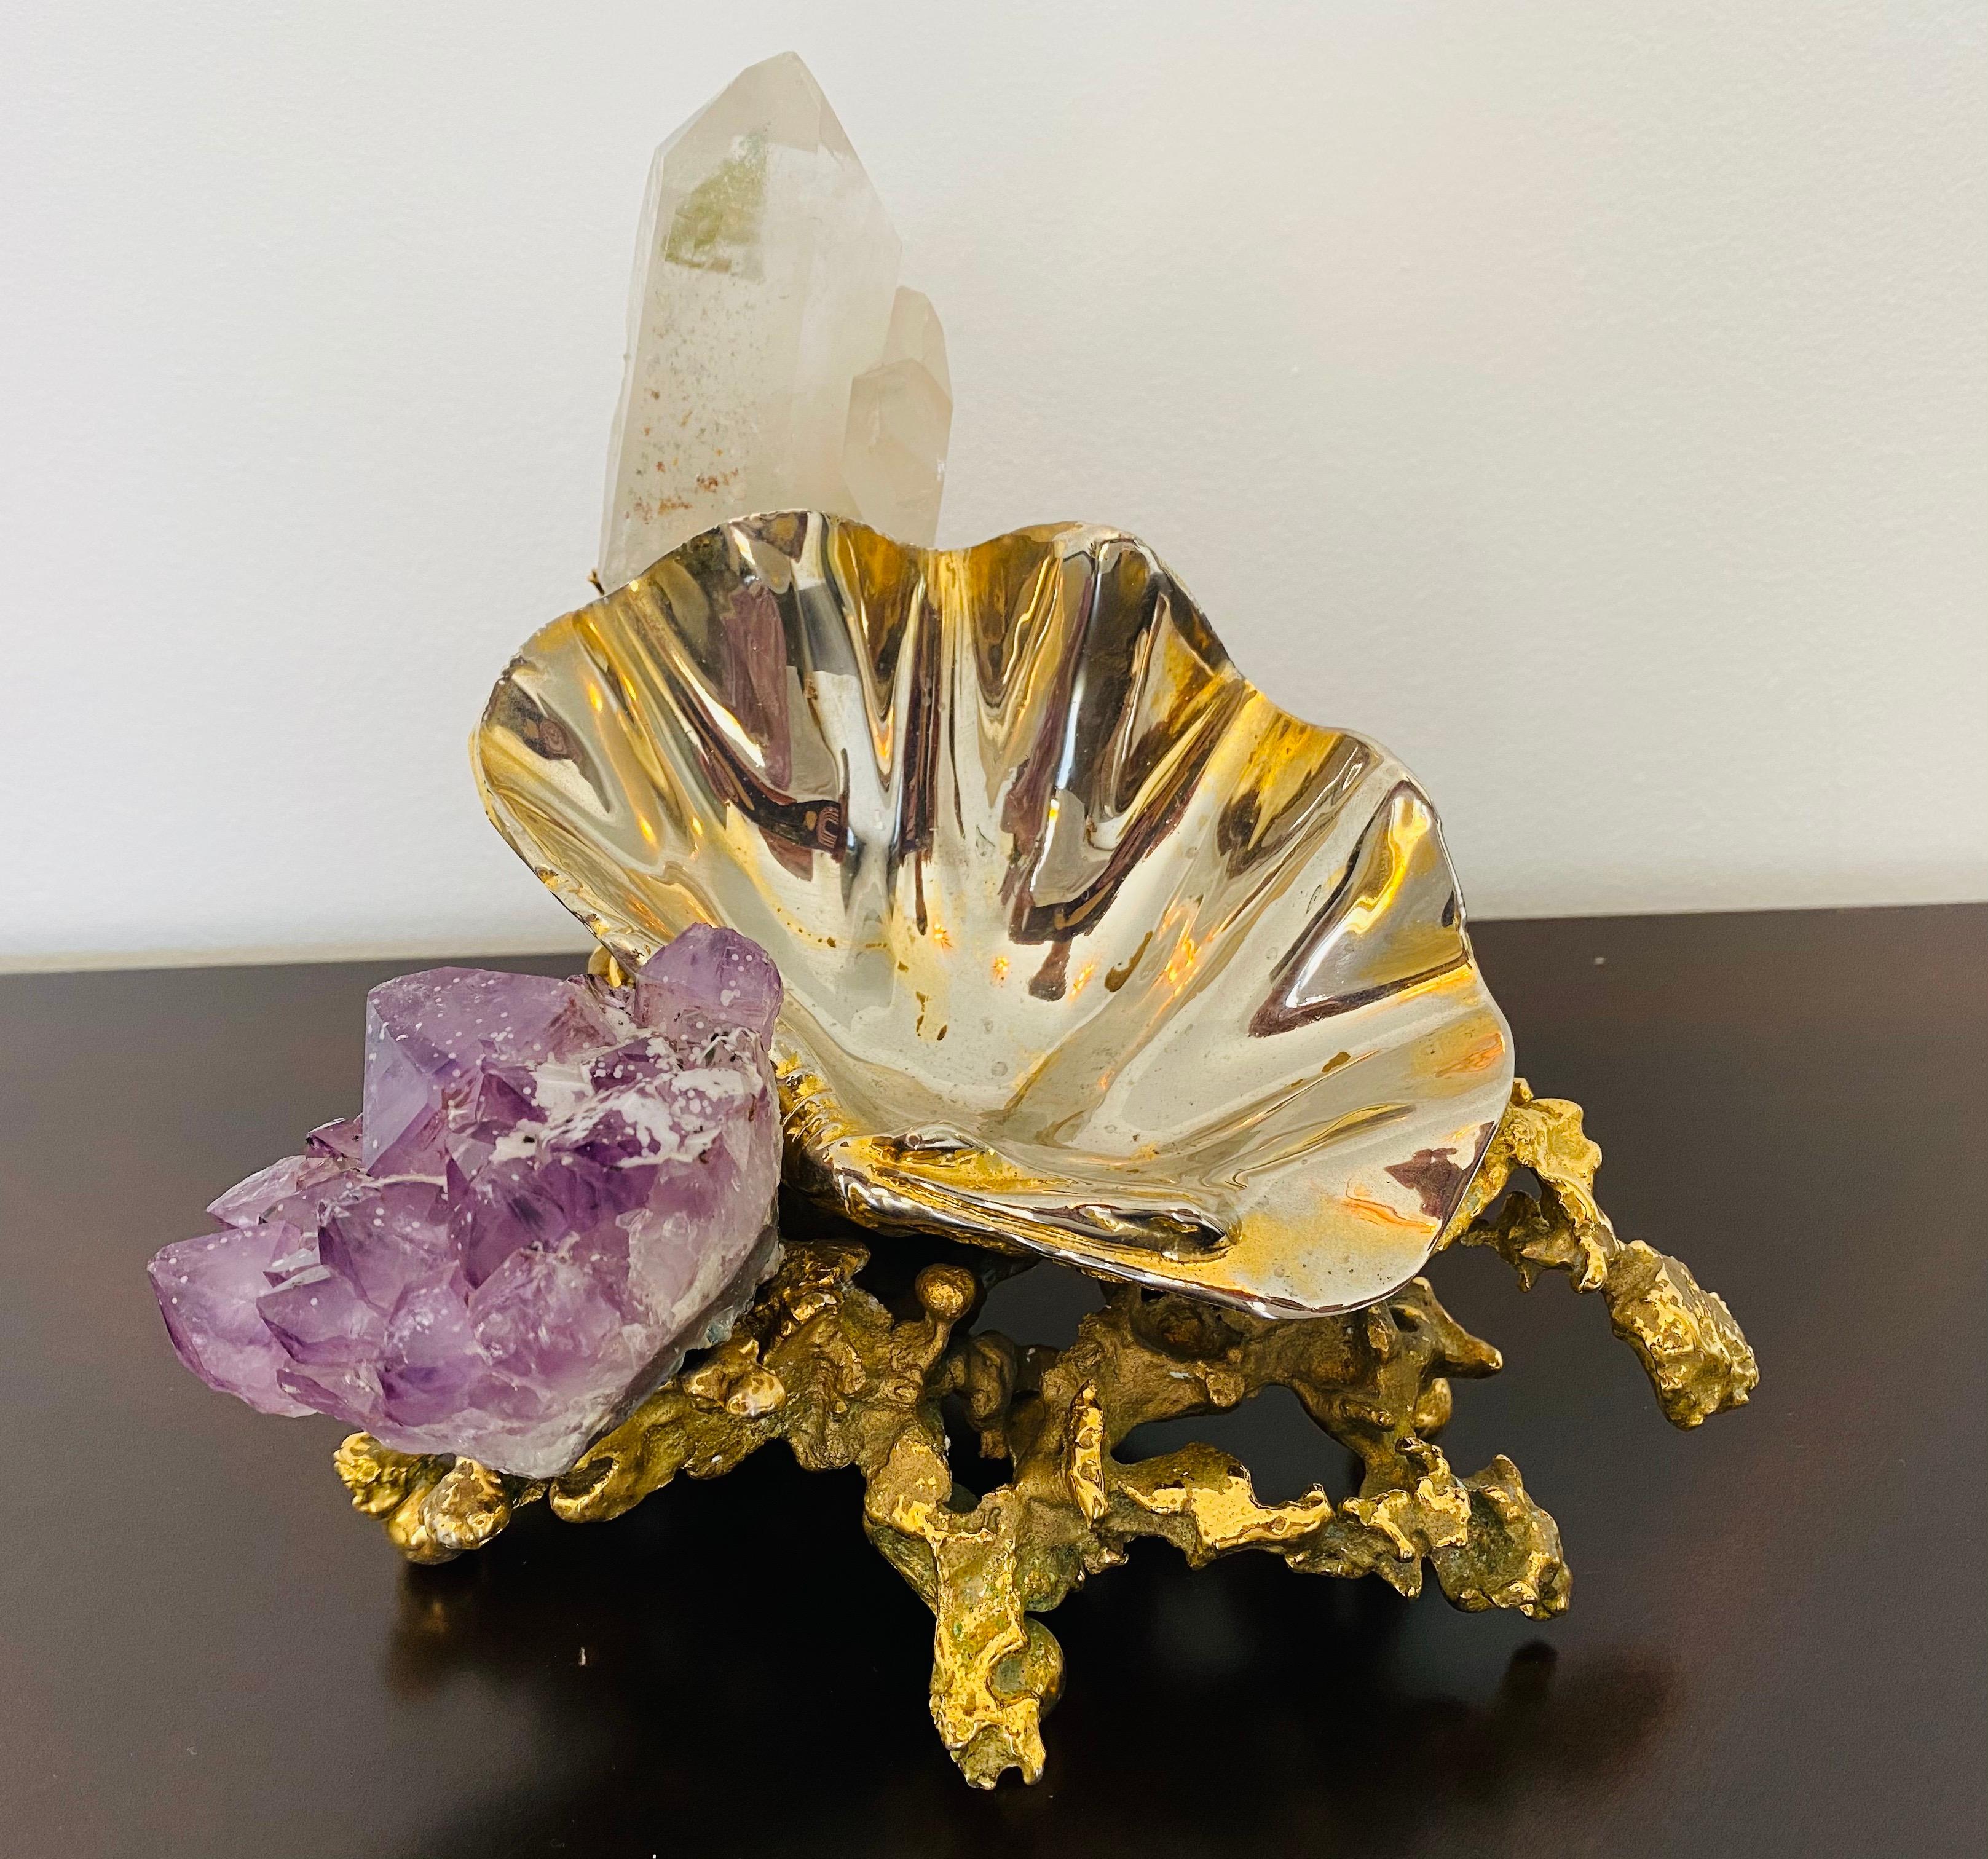 A unique 1970s French Dore/Golden bronze sculpture with a large amethyst and quartz clusters and oyster shell. 

Biography: Claude Victor Boeltz, the European surrealist master artist was born in Paris, France in 1937. ... This gorgeous